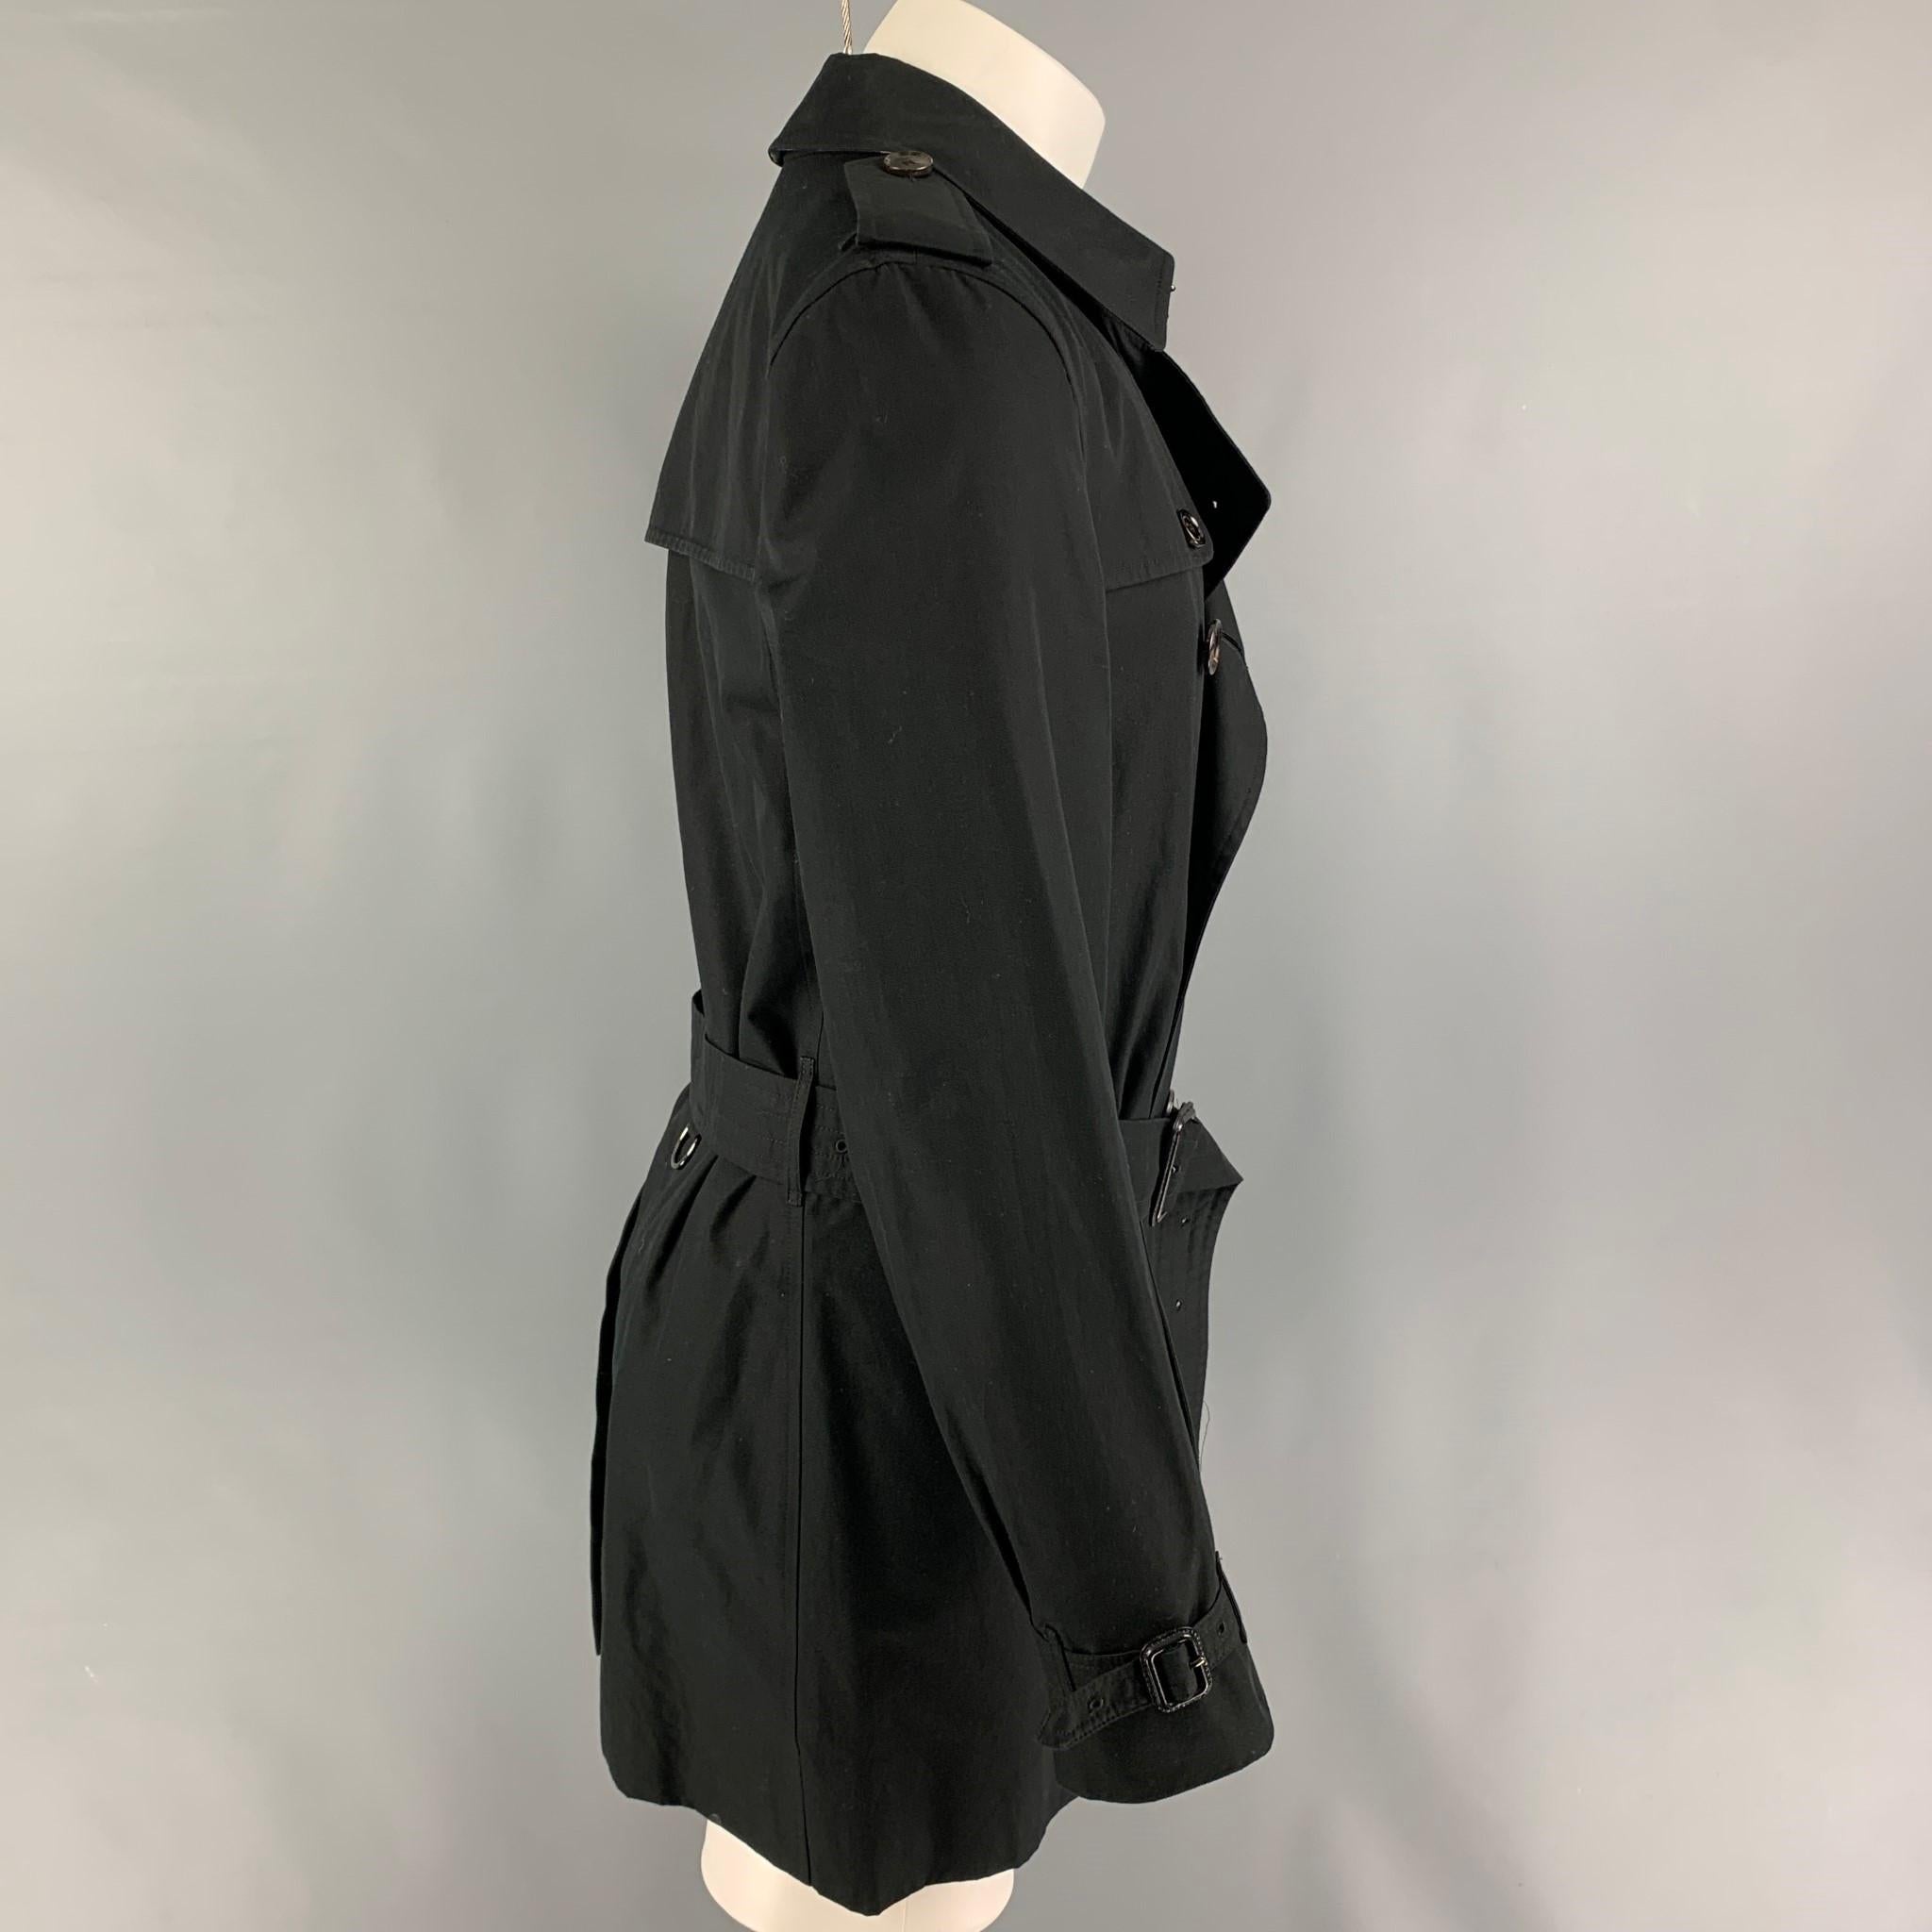 BURBERRY LONDON coat comes in a black cotton with a full plaid liner featuring a belted detail, epaulettes, slit pockets, and a double breasted closure. Includes dust bag. 

Very Good Pre-Owned Condition.
Marked: 50

Measurements:

Shoulder: 17.5